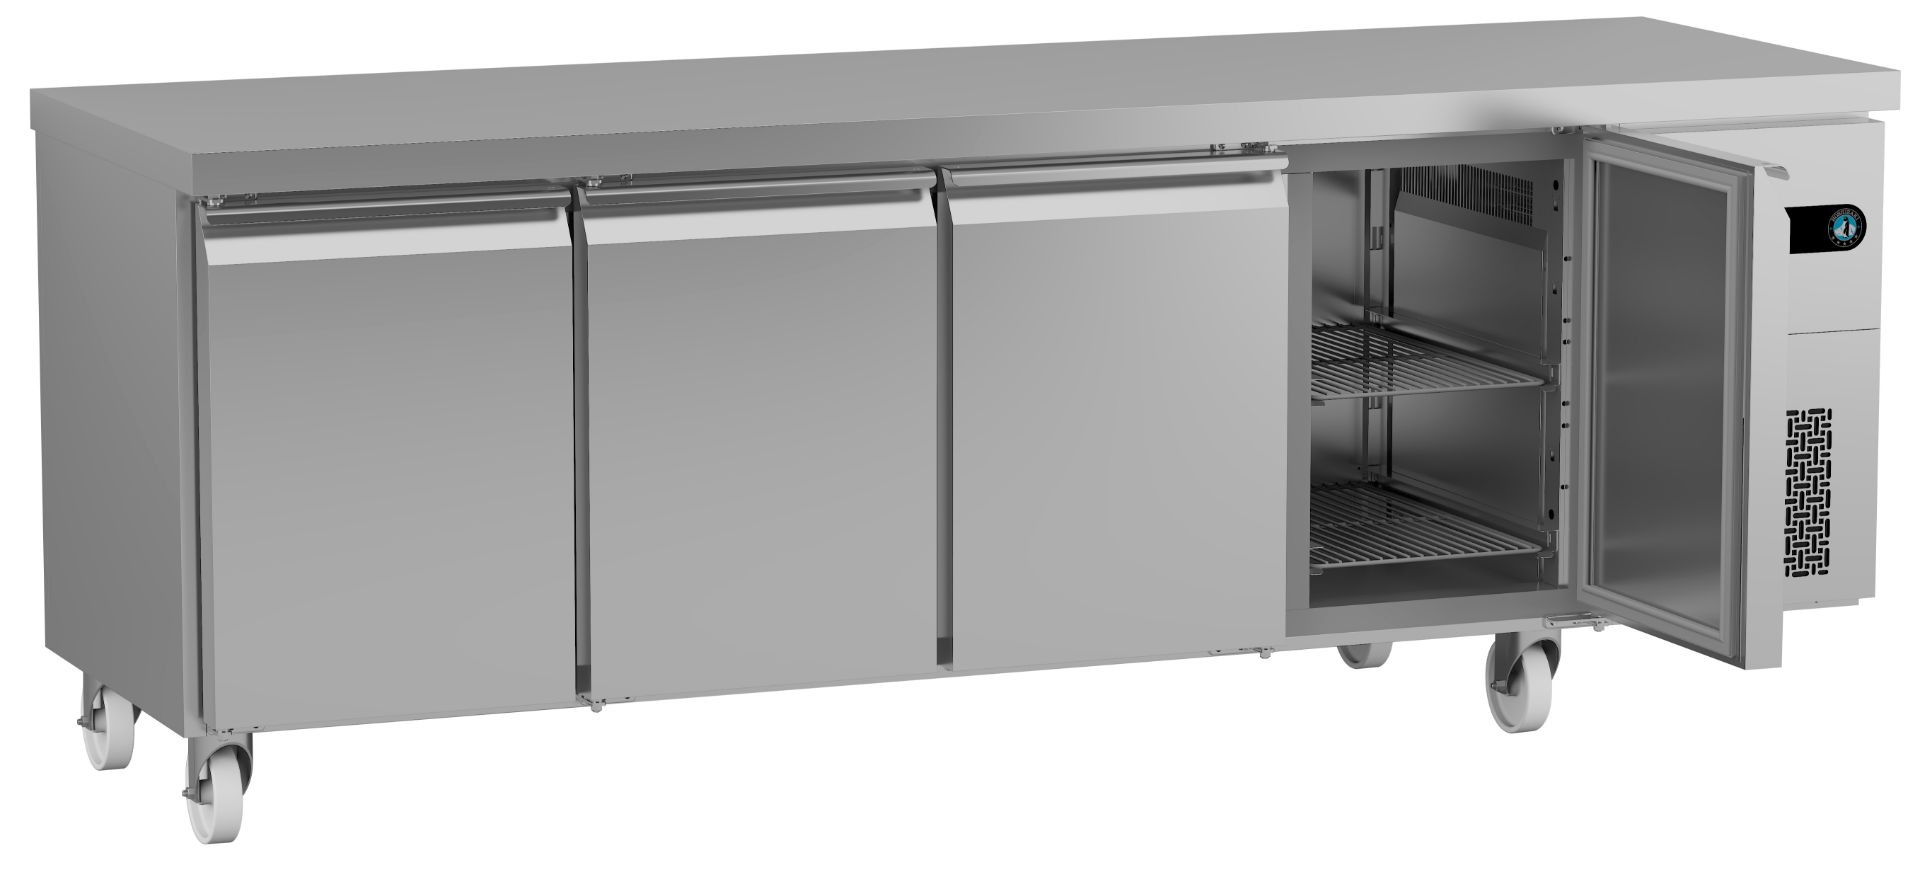 Snowflake Refrigerated Counter SCR-225CHRC-2222-C1 - Image 4 of 4